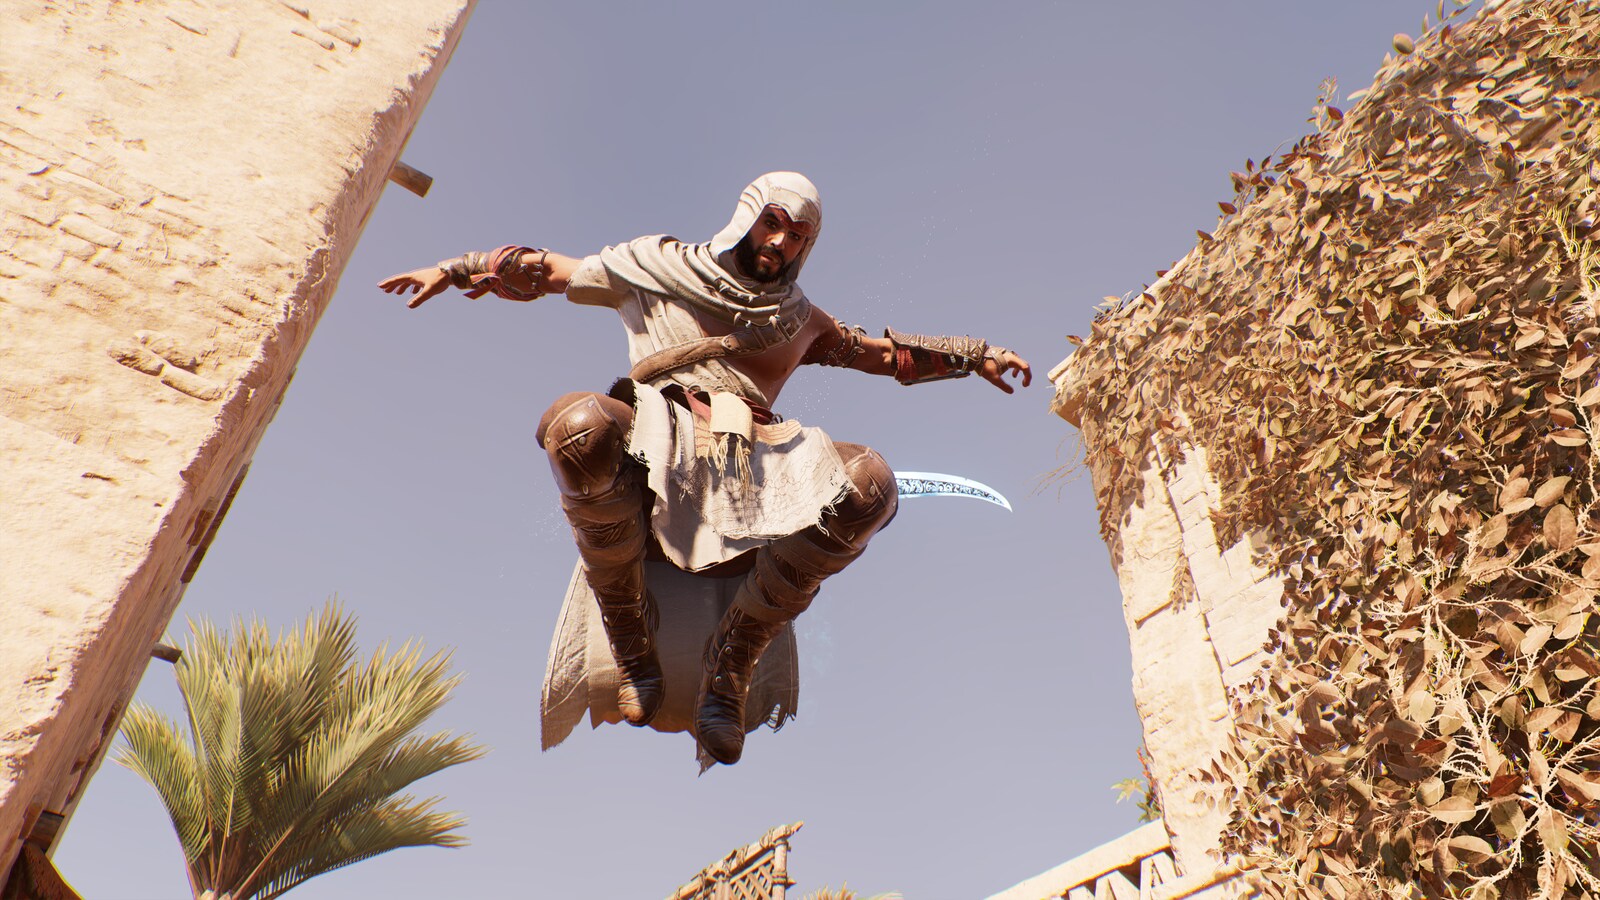 Assassin's Creed Mirage length and how long to beat